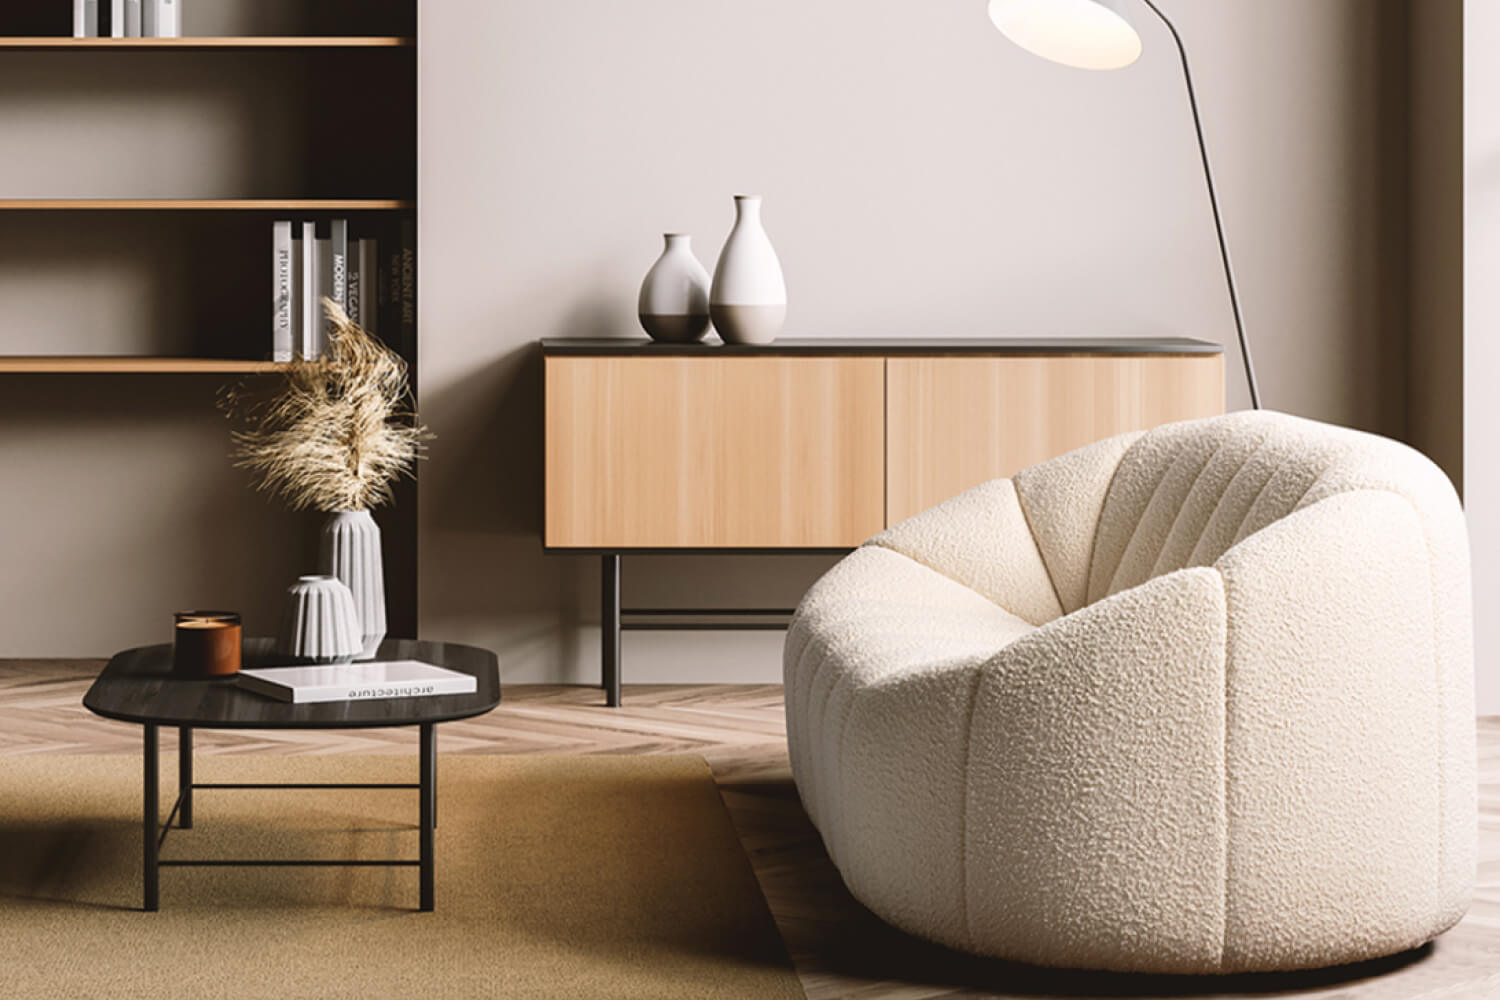 Simplicity Redefined: How to Achieve Zen Vibes with Mid-Century Modern